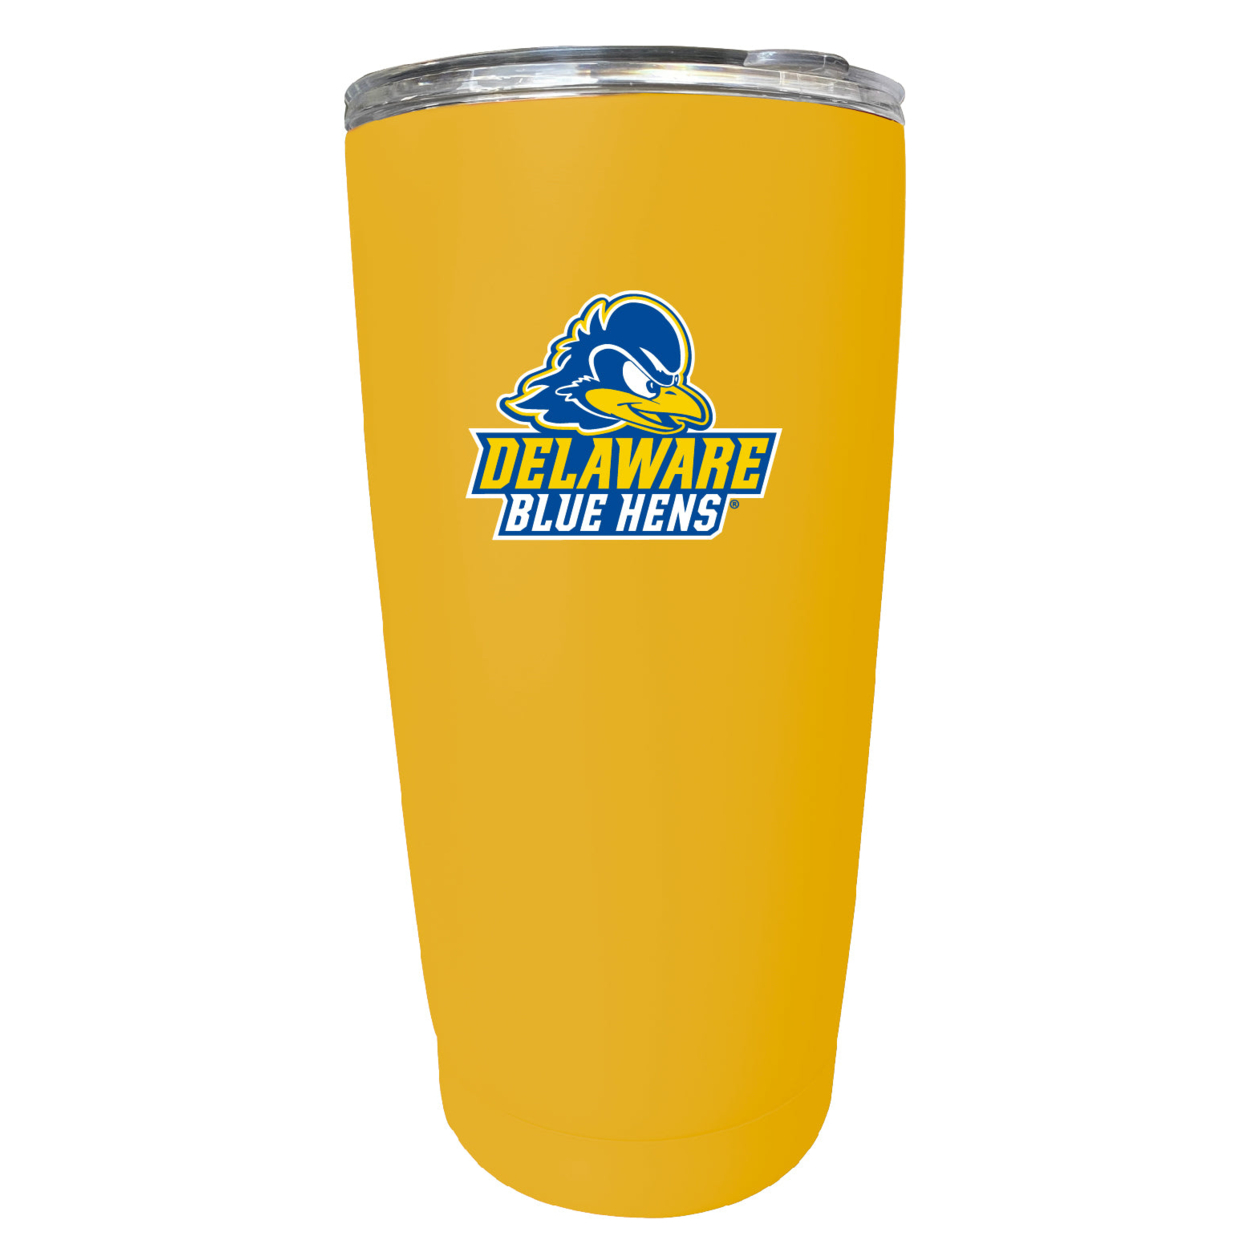 Delaware Blue Hens 16 Oz Stainless Steel Insulated Tumbler - Pink